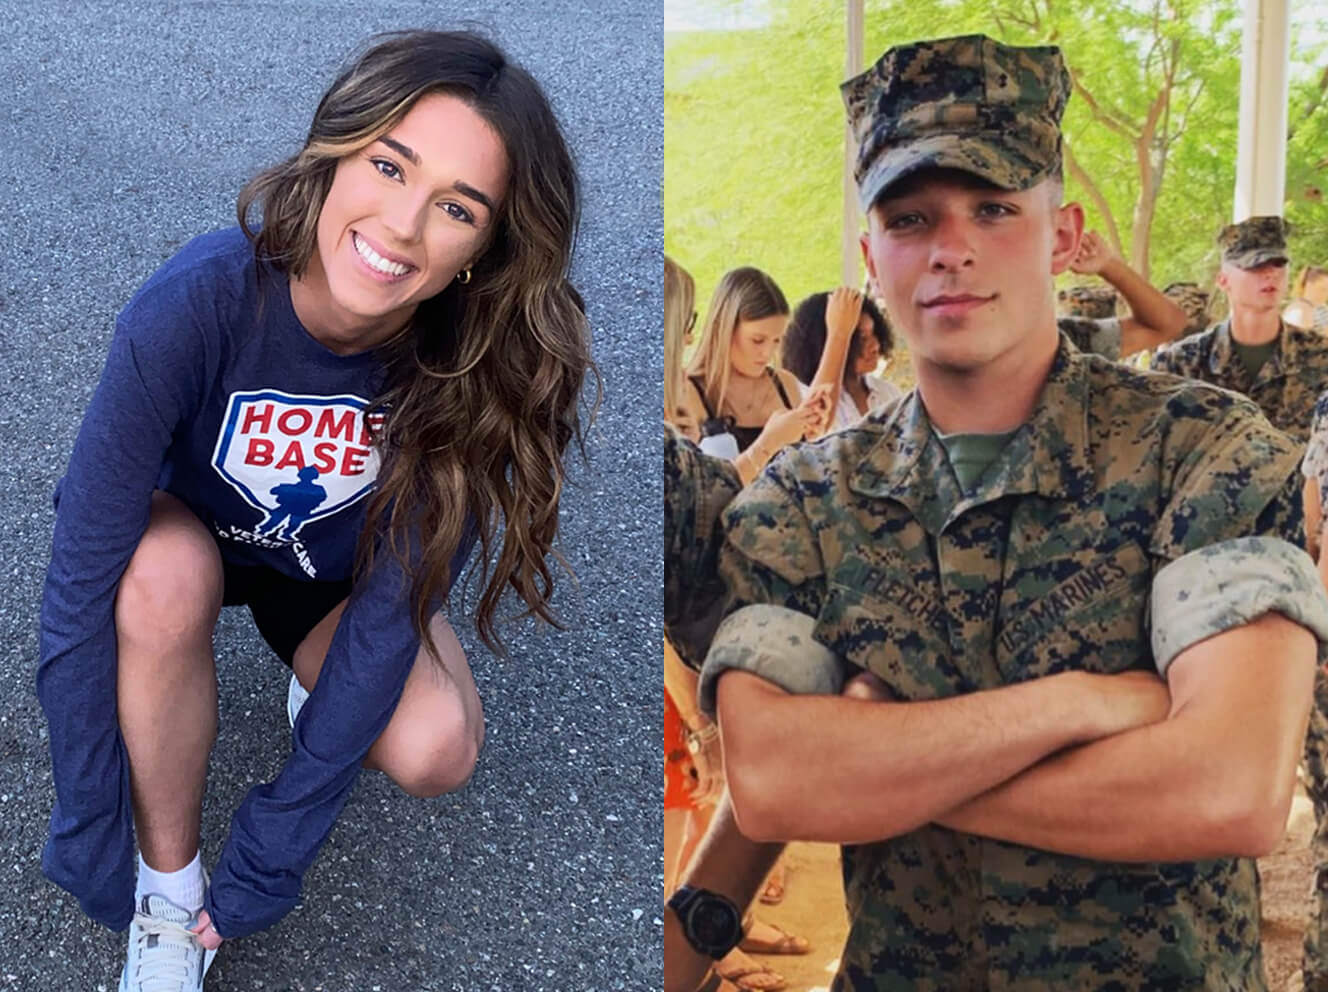 Brittany Fletcher is running the Boston Marathon to support Home Base and to honor Drew, her brother who is in the Marine Corps.